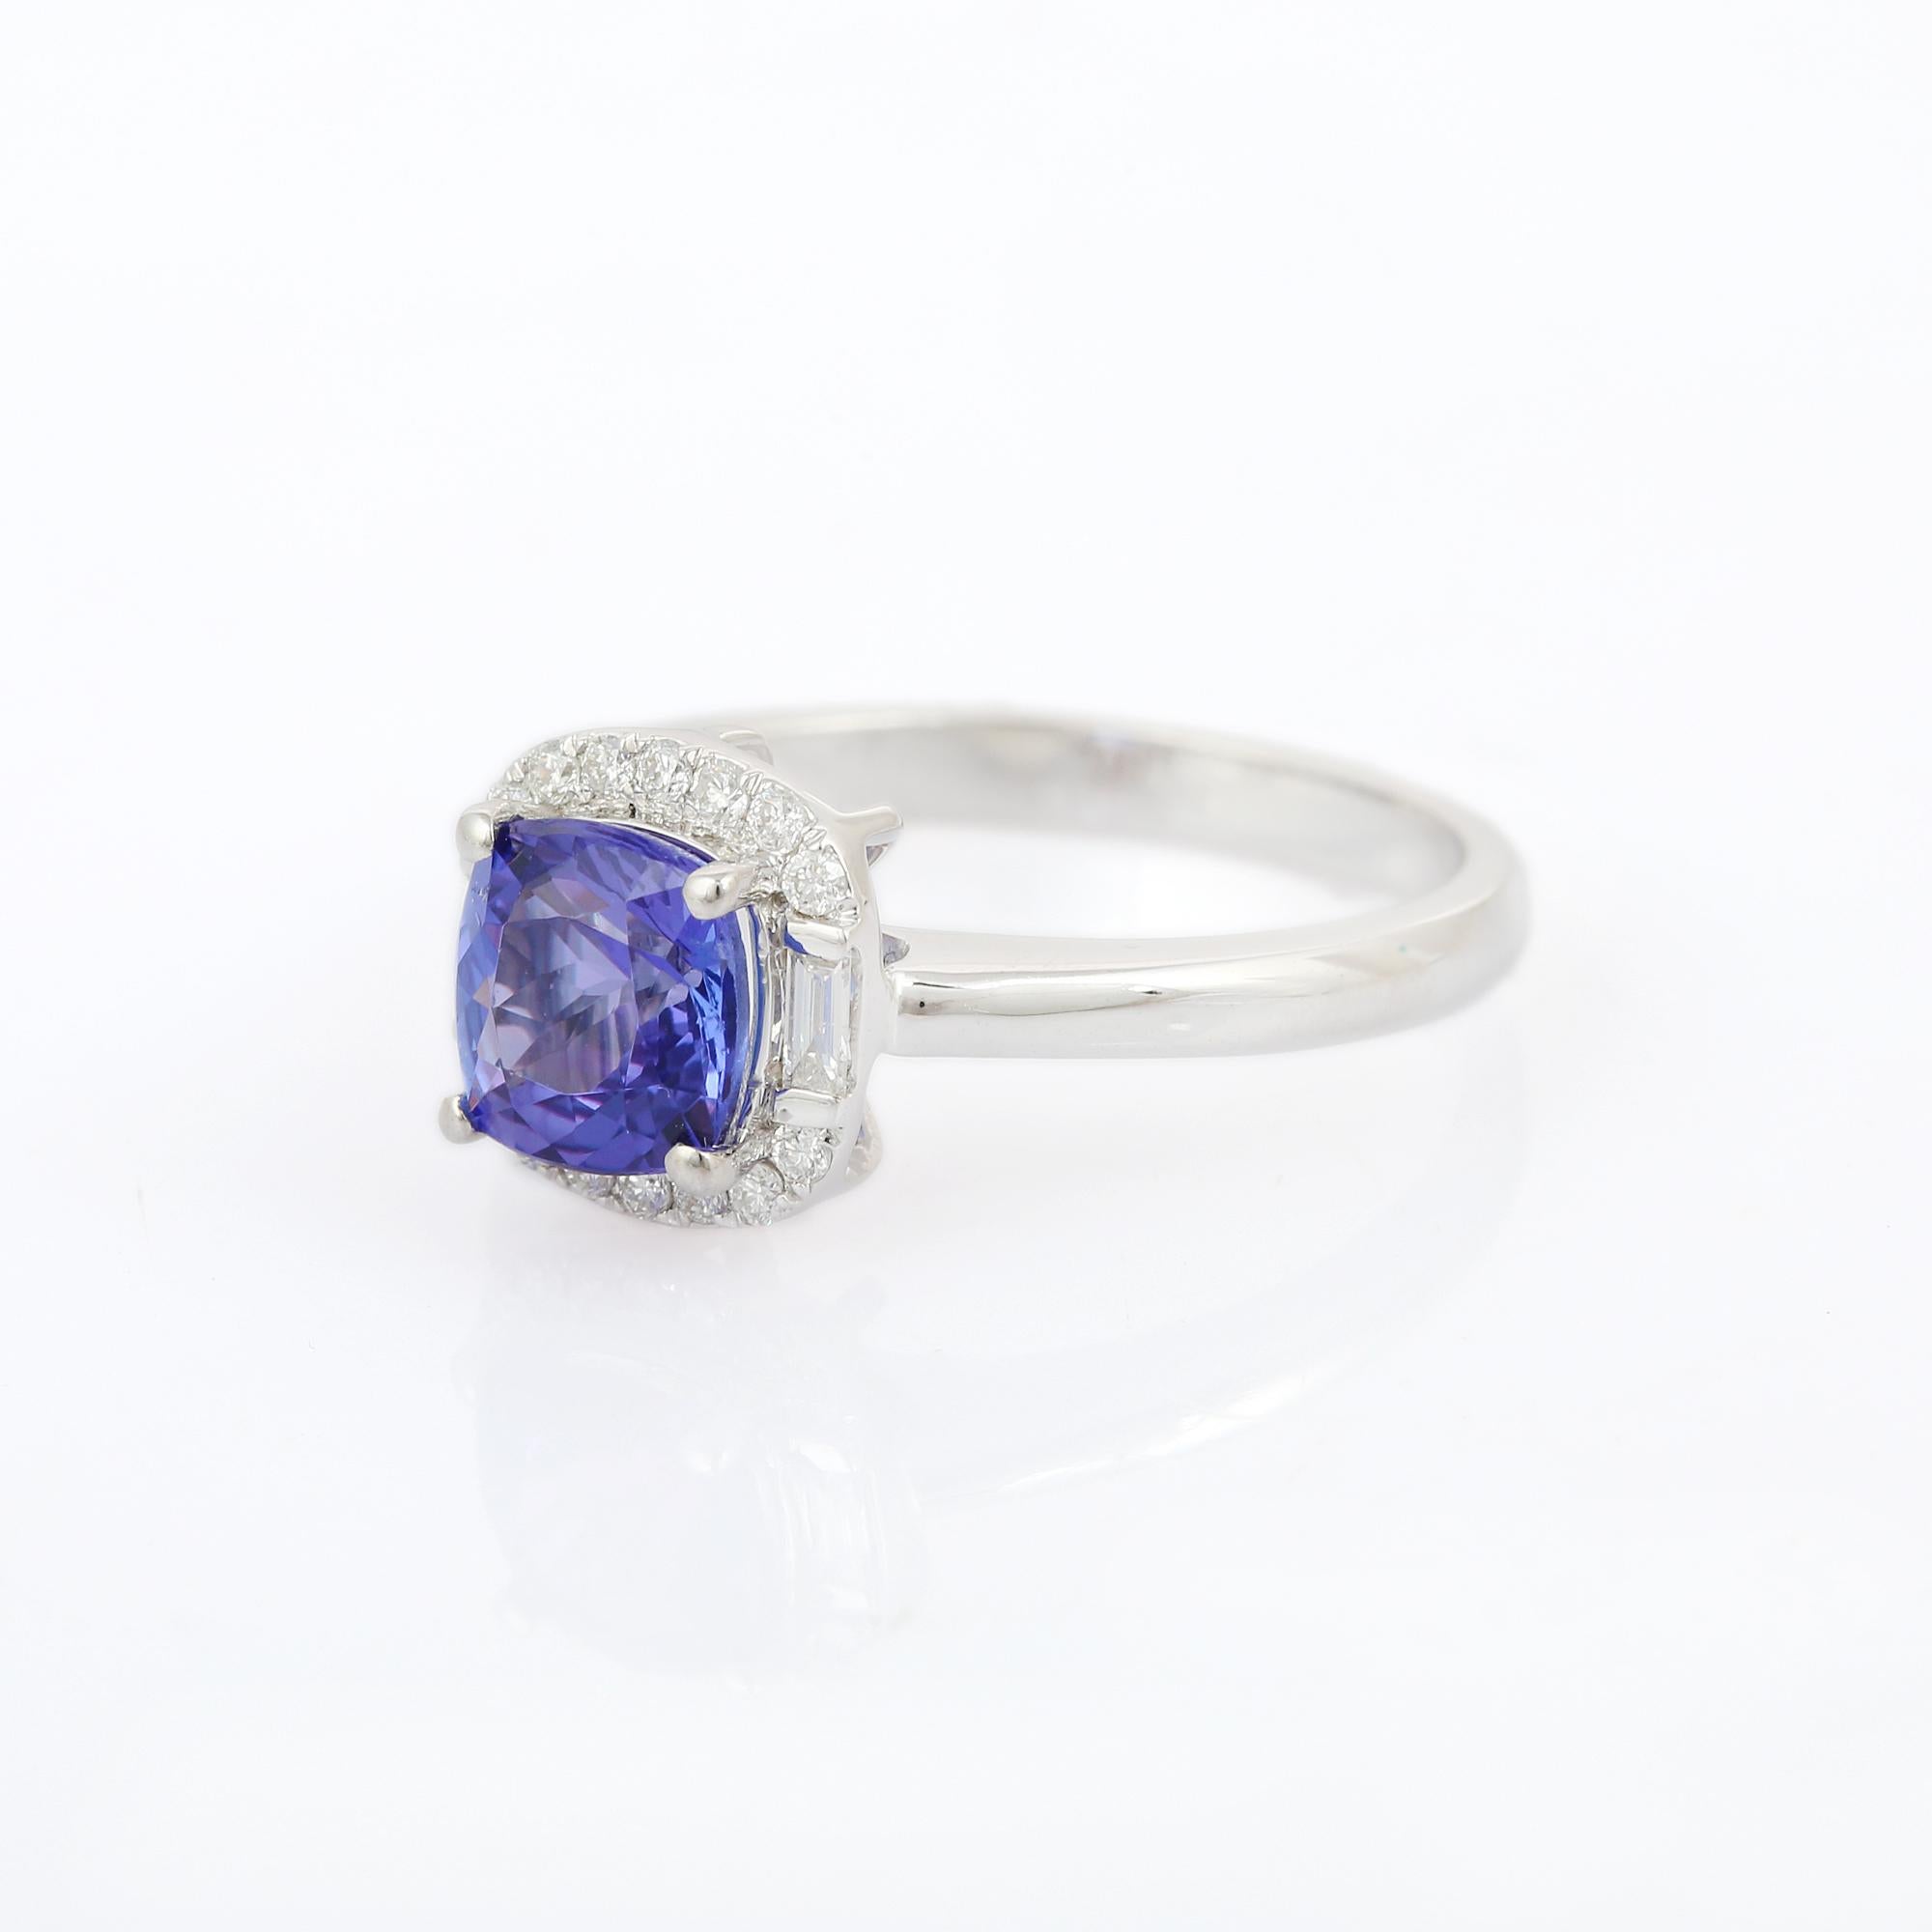 For Sale:  18k Solid White Gold Cushion Cut Tanzanite and Diamond Ring 2